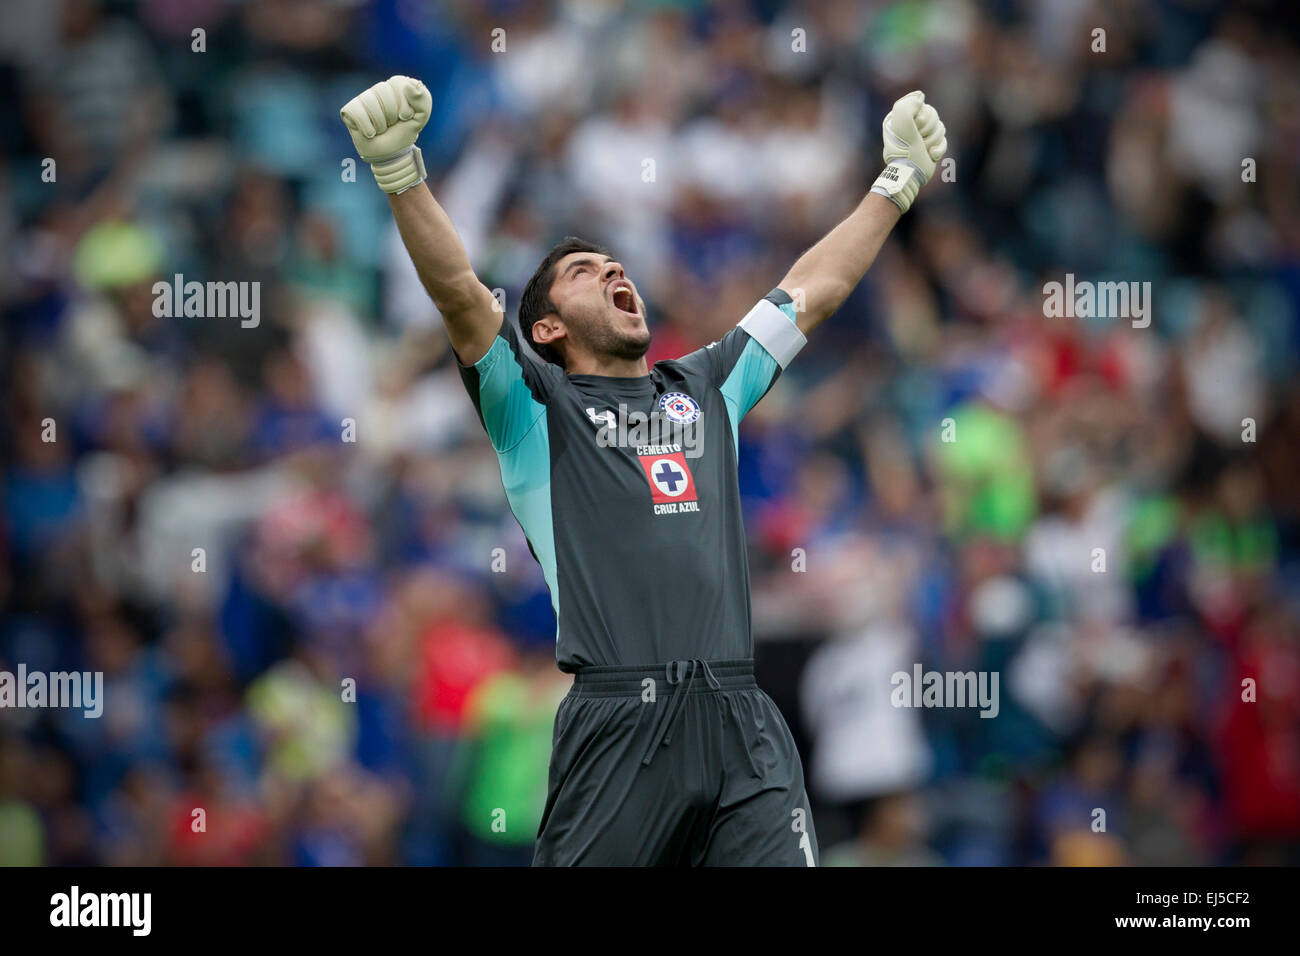 Mexico City, Mexico. 21st Mar, 2015. Cruz Azul's goalkeeper Jesus Corona celebrates a score during the match corresponding to the Day 11 of the 2015 Closing Tournament of MX League against Xolos, in the Azul Stadium, in Mexico City, capital of Mexico, on March 21, 2015. © Alejandro Ayala/Xinhua/Alamy Live News Stock Photo